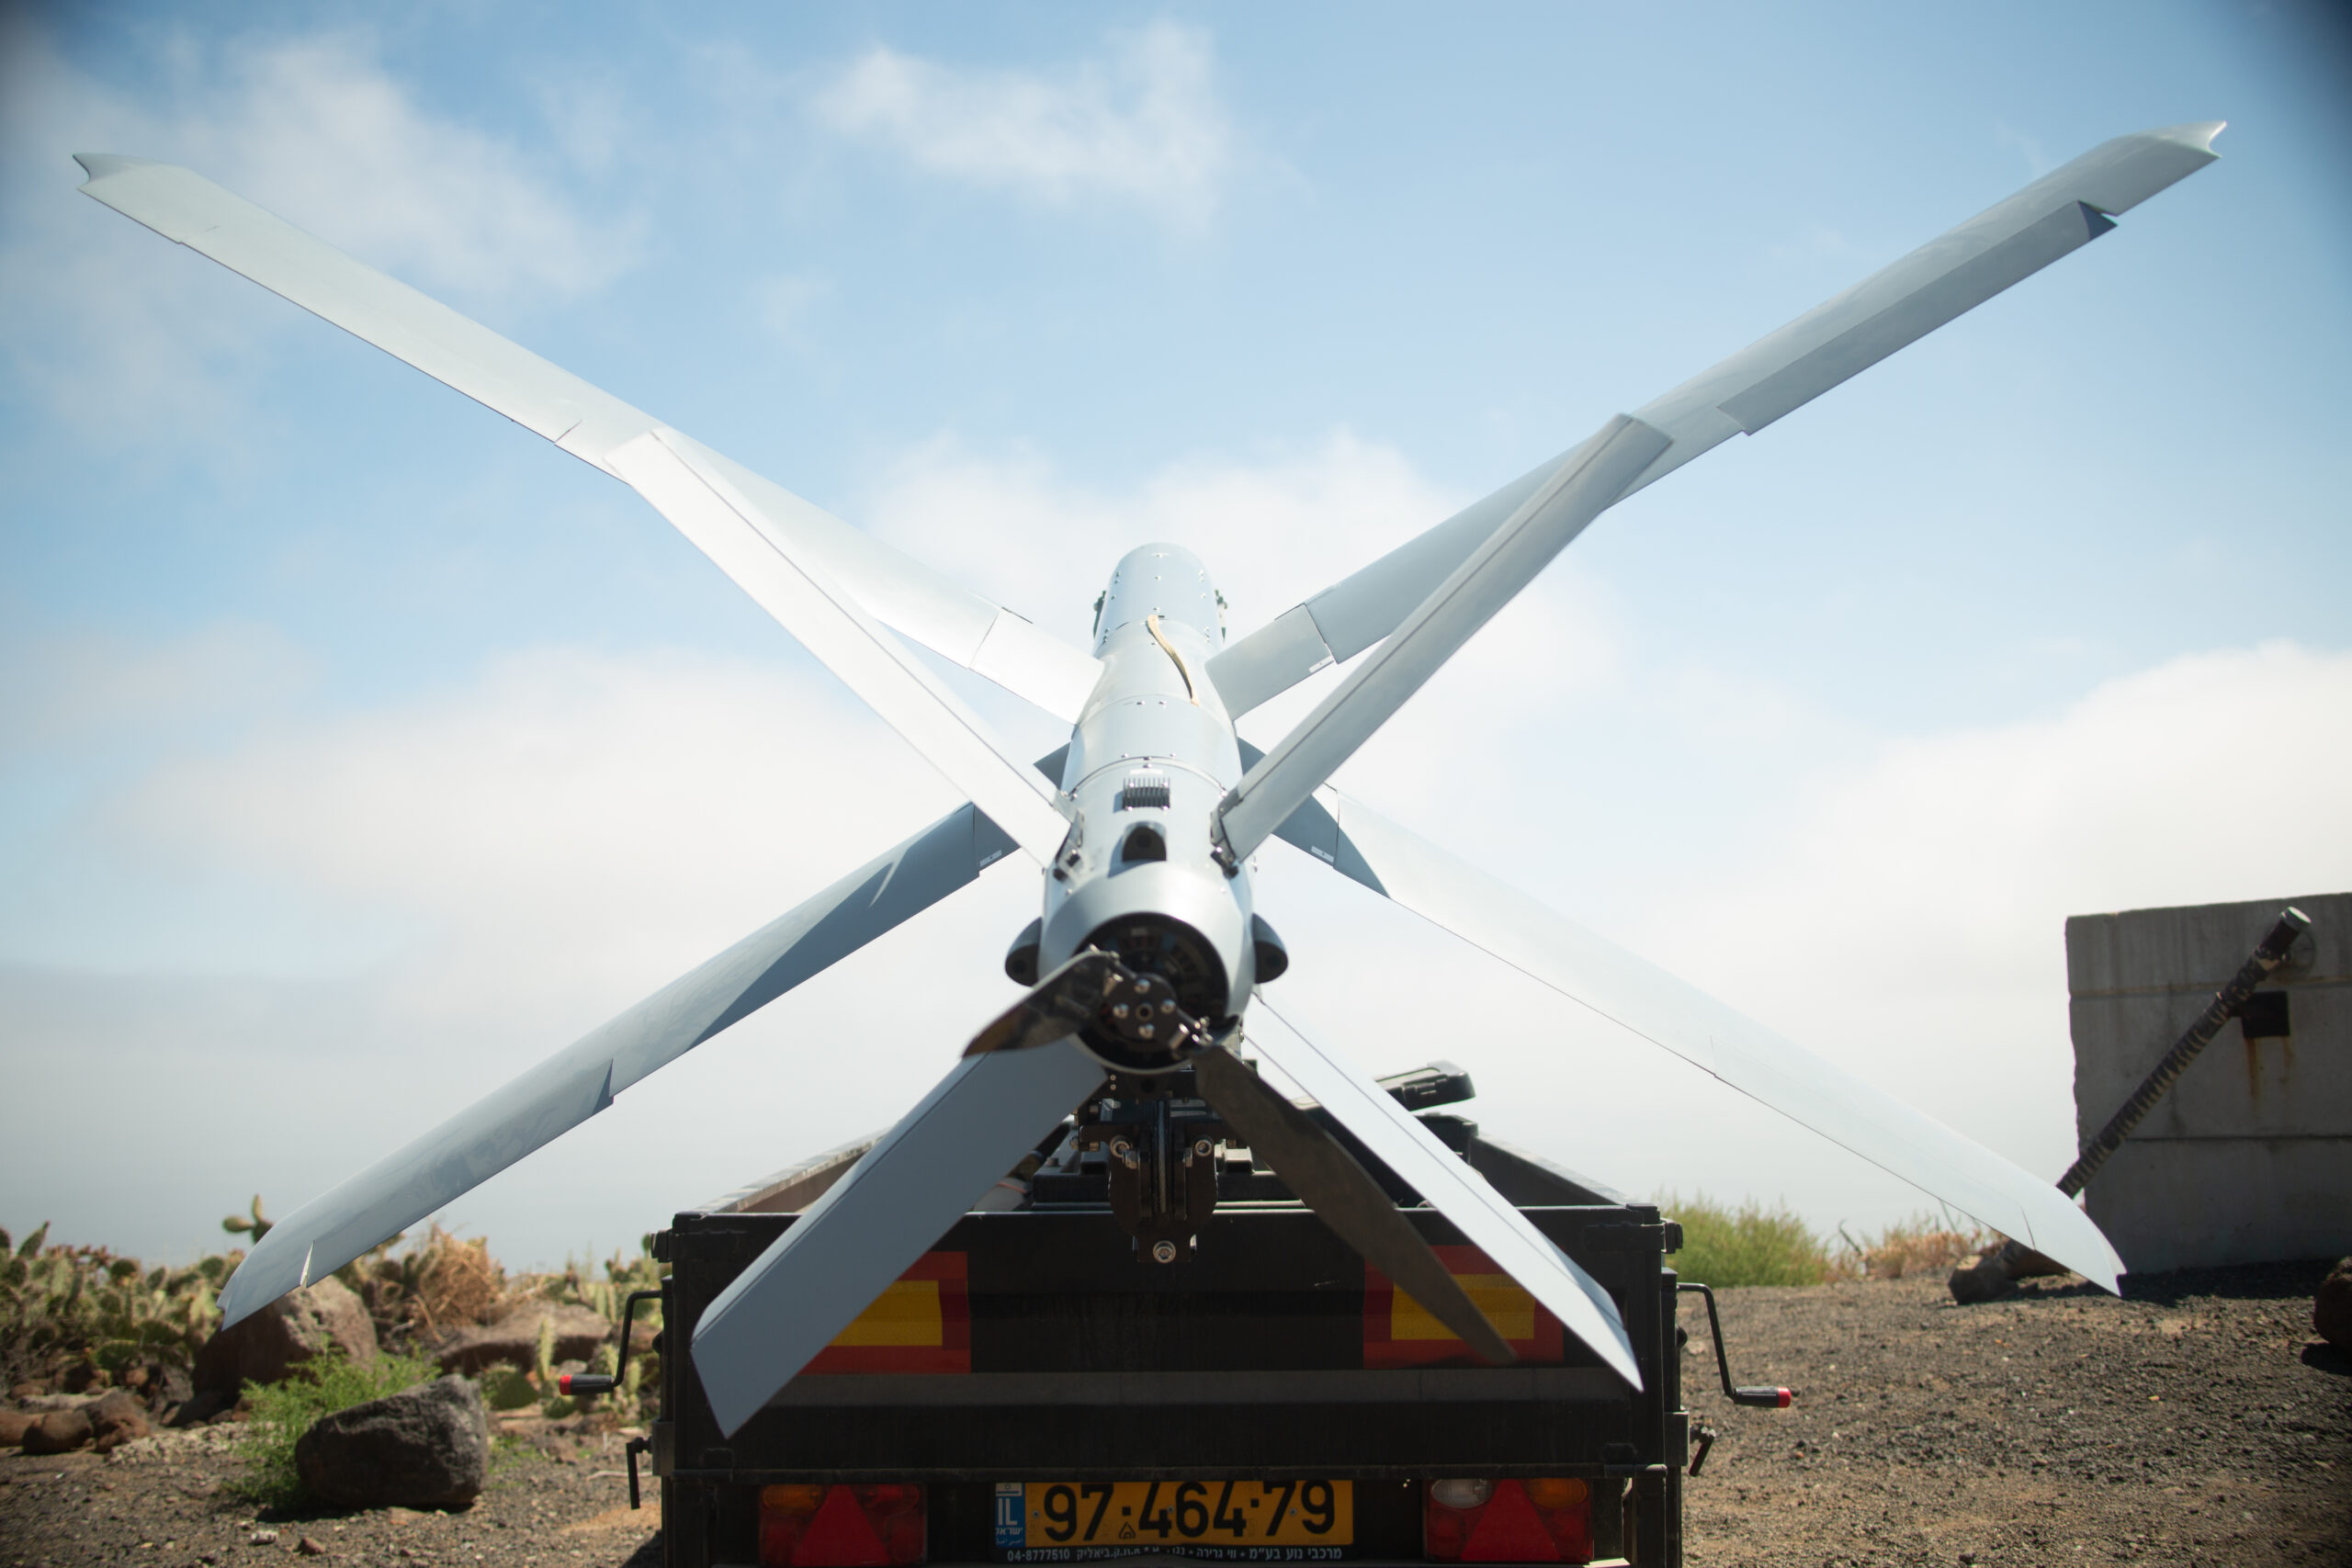 A U.S. Marine Corps Hero-400 loitering munition drone is staged before flight on San Clemente Island, California, May 25, 2022. The Hero-400 is a loitering munition that the United States Marine Corps and other Department of Defense entities are beginning to incorporate into specific mission sets. This initial training flight develops the unmanned aerial systems pilots’ confidence and abilities to be able to operate the Hero-400 in any clime and place, and enabling 3rd MAW to remain a more lethal and ready force. (U.S. Marine Corps photo by Lance Cpl. Daniel Childs)